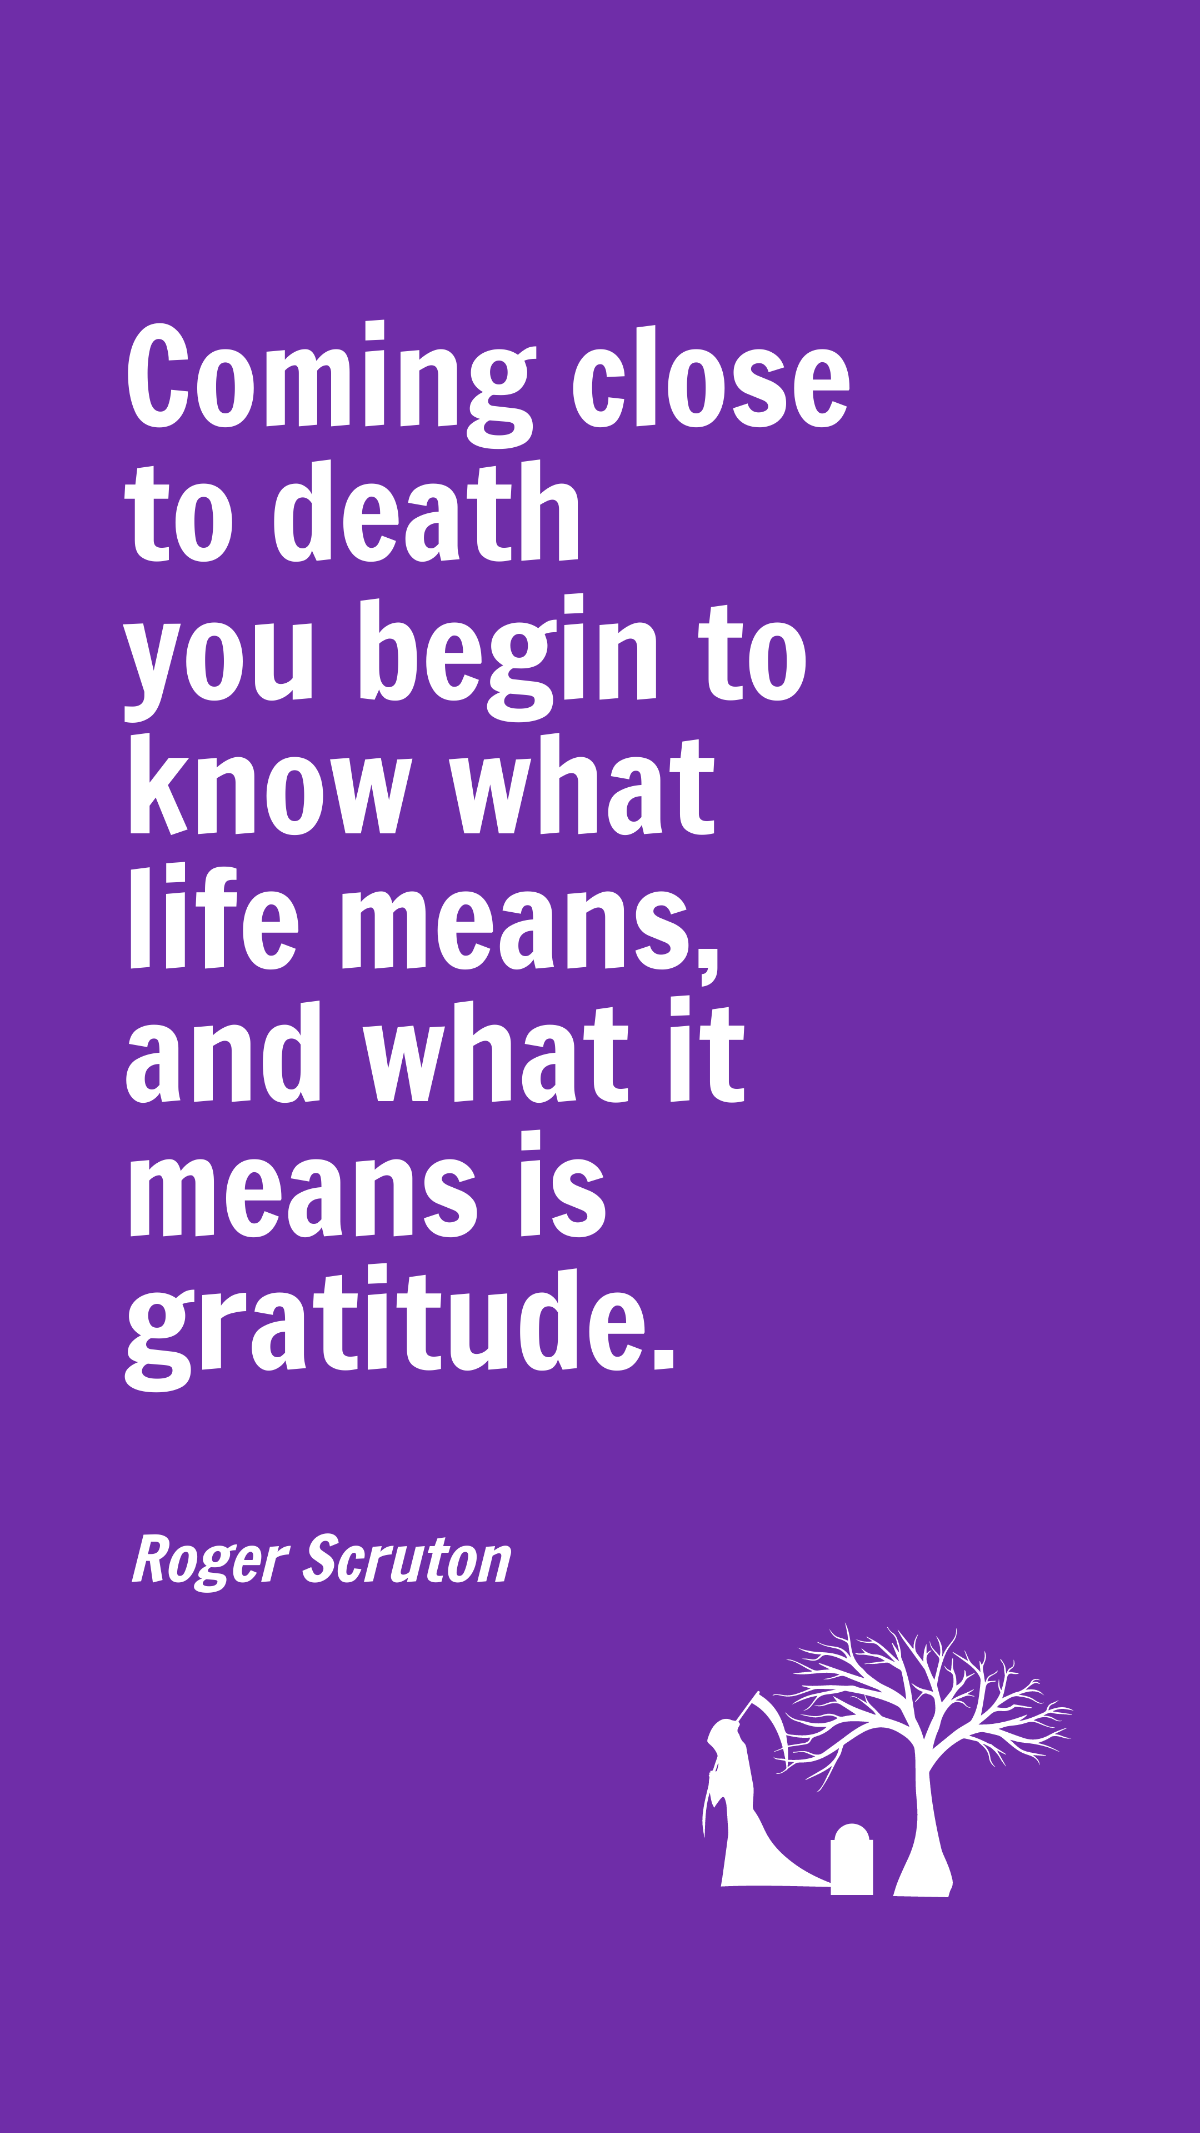 Roger Scruton - Coming close to death you begin to know what life means, and what it means is gratitude. Template